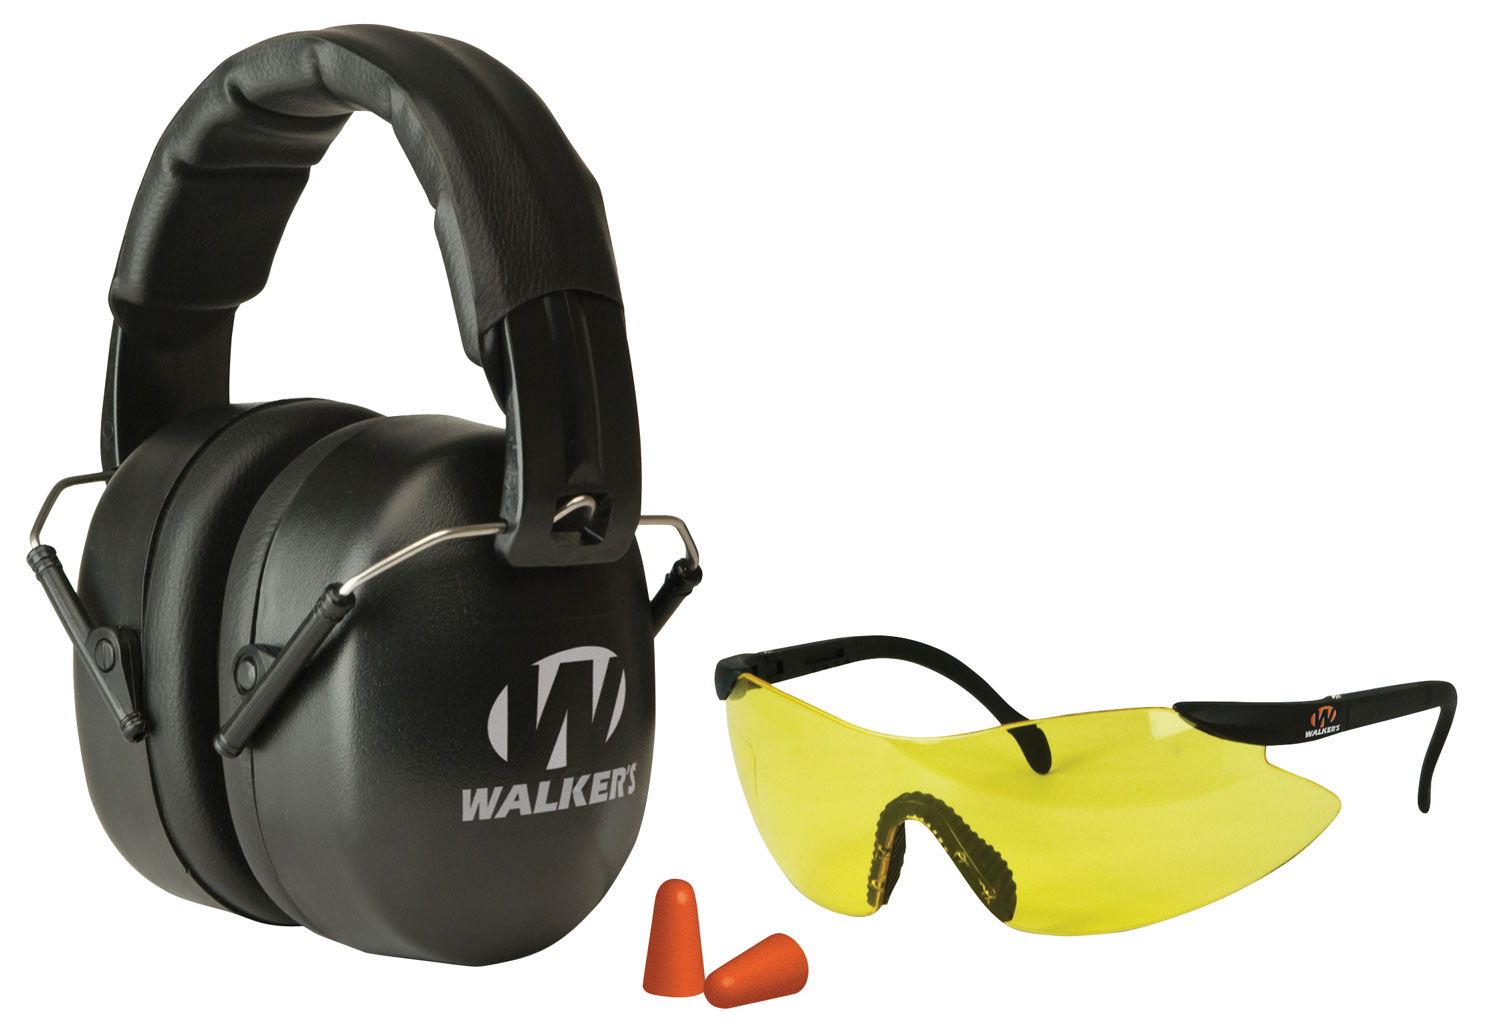 Walkers GWPFM3GFP EXT Range Shooting Muff Combo Kit Includes Foam Ear Plugs, 31 db Over the Head Shooting Muff, Sport Glasses w/Polycarbonate Lens